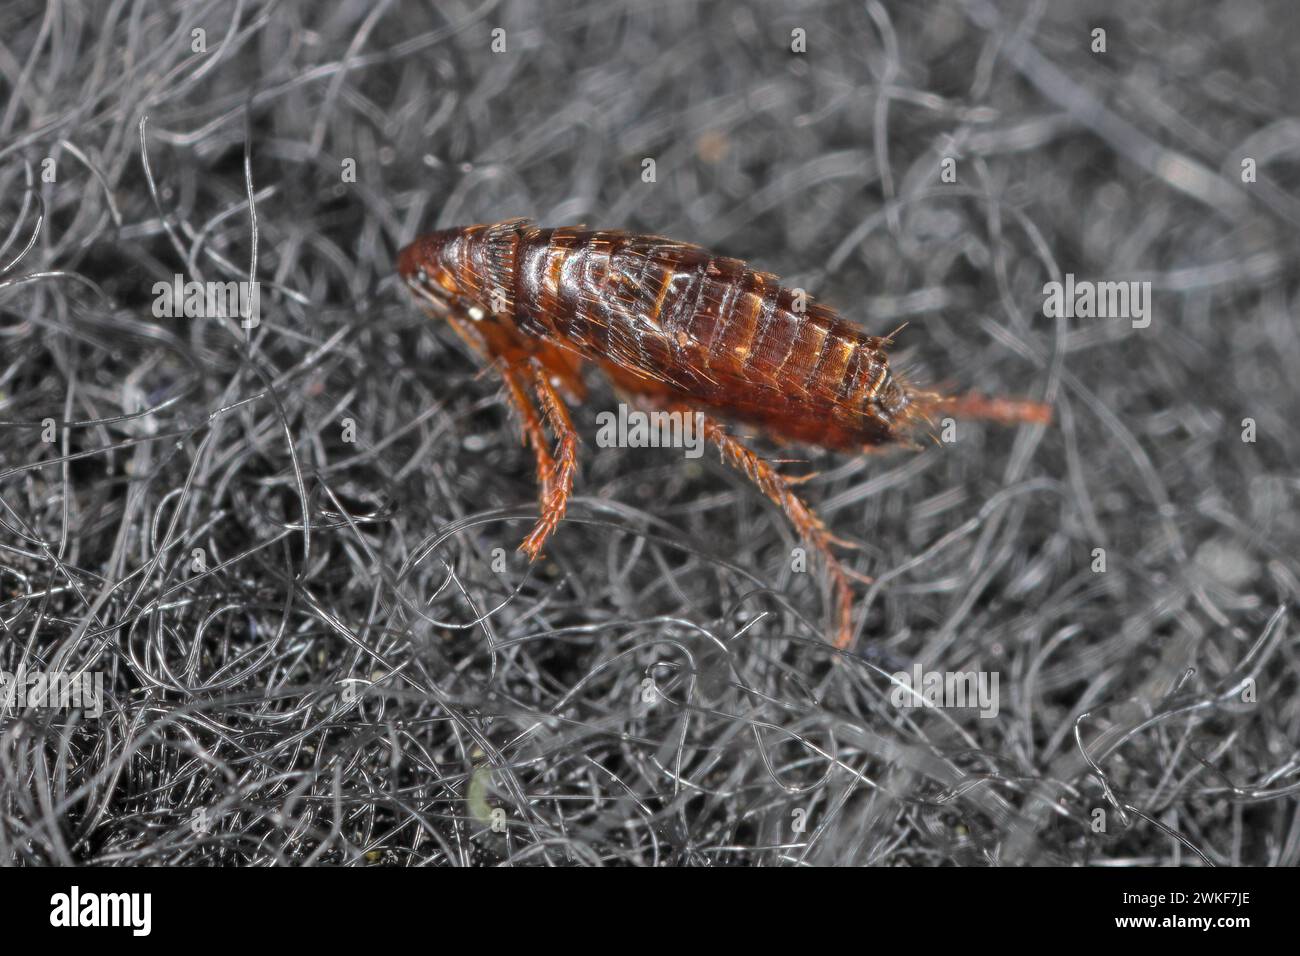 Dog flea (Ctenophalides canis) on the carpet in the apartment. Stock Photo